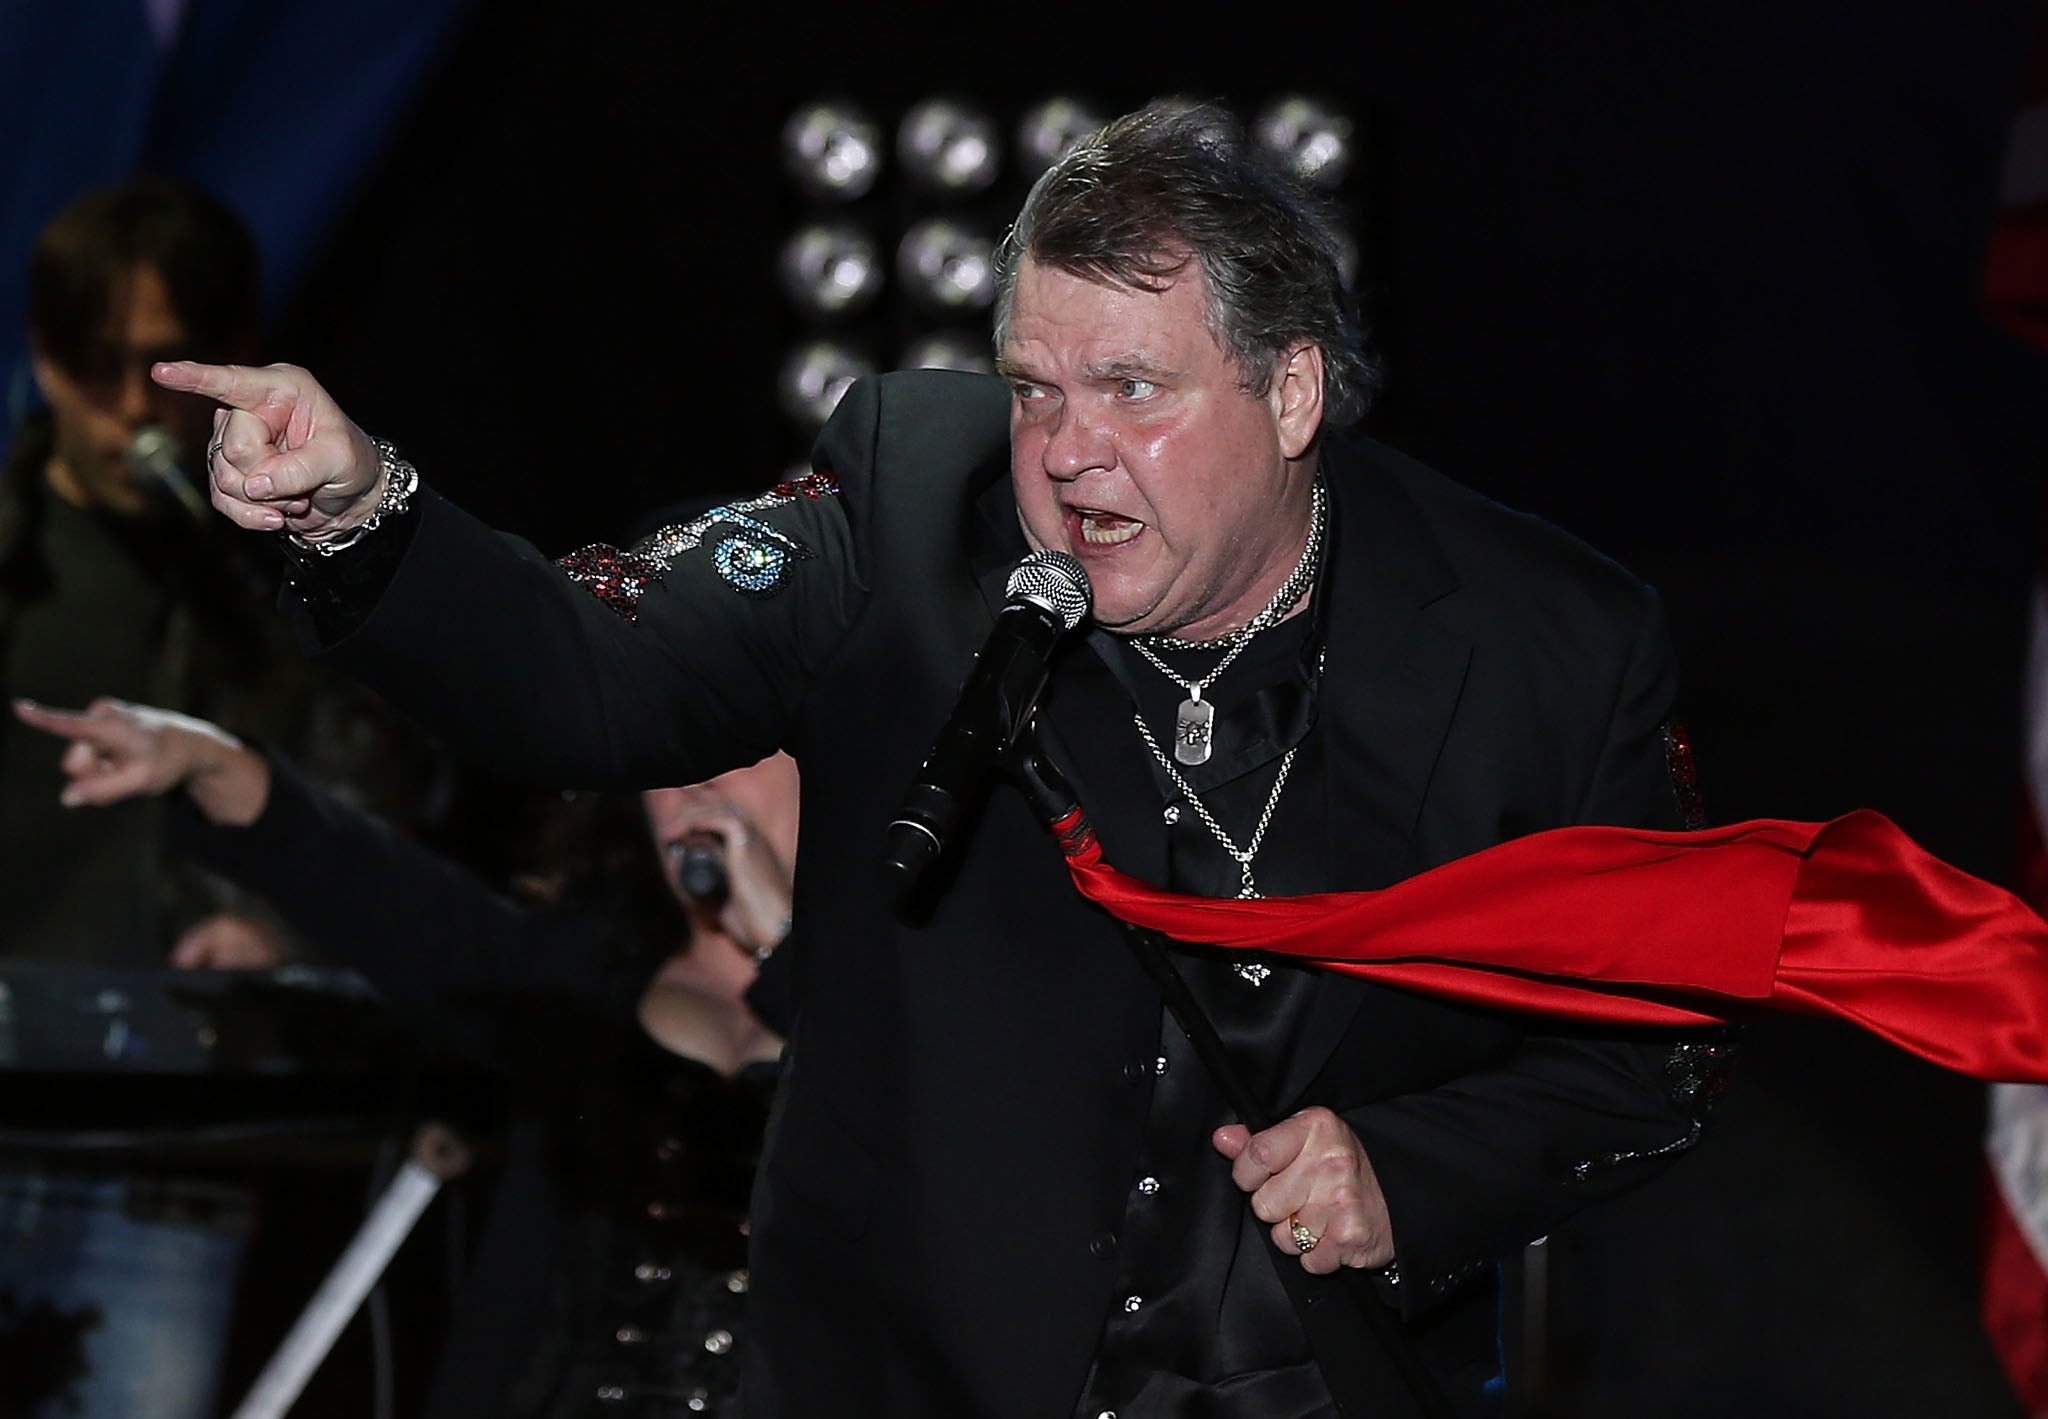 Meat Loaf performing in October 2012